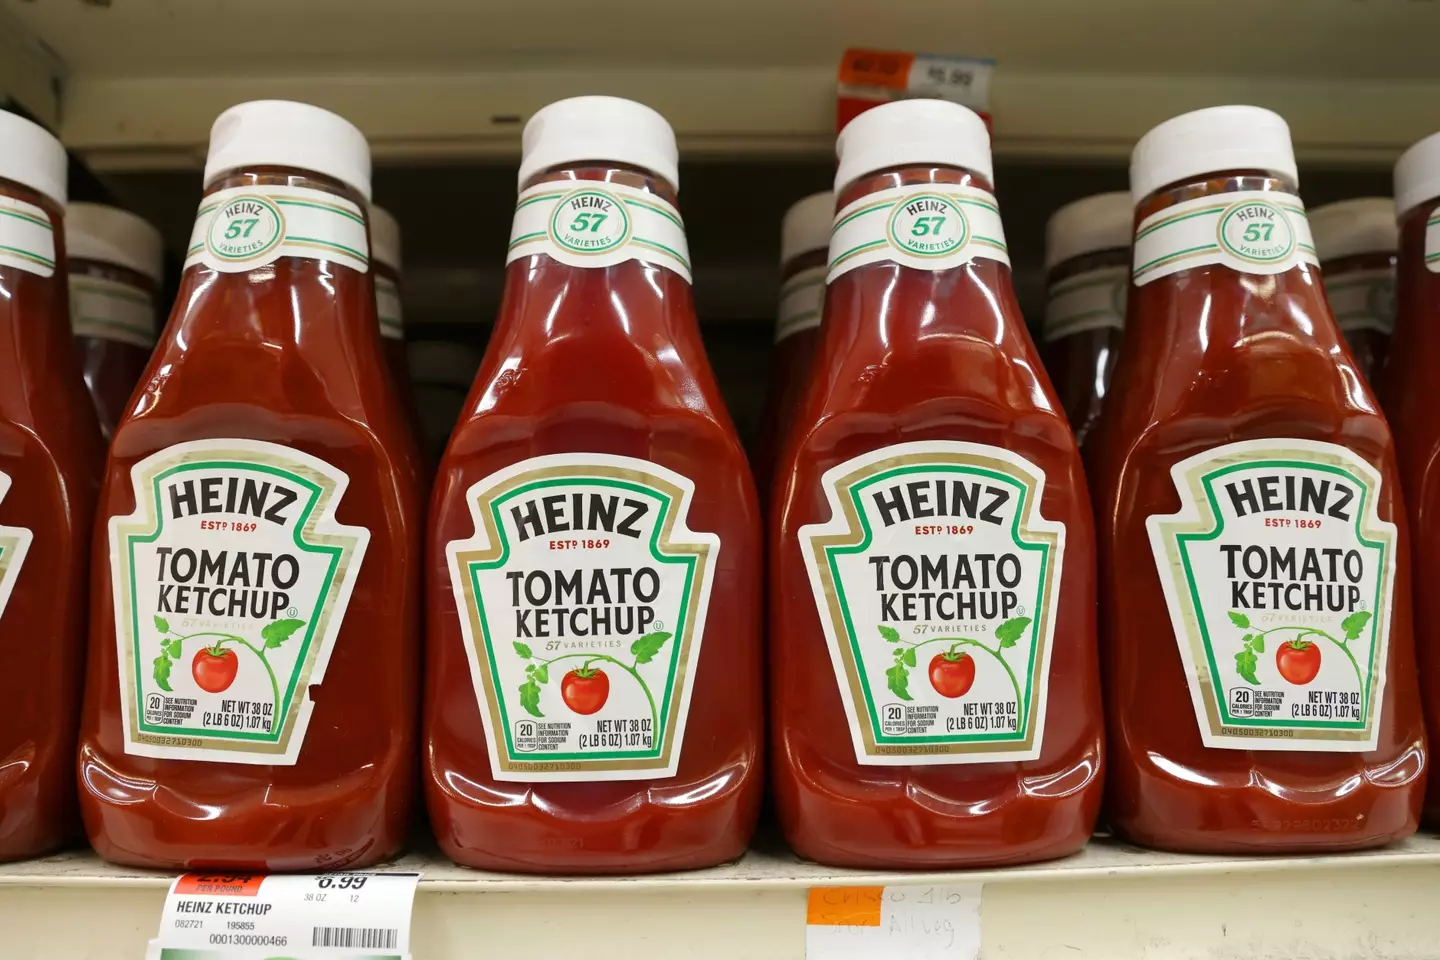 People have debated where to keep ketchup in the home.